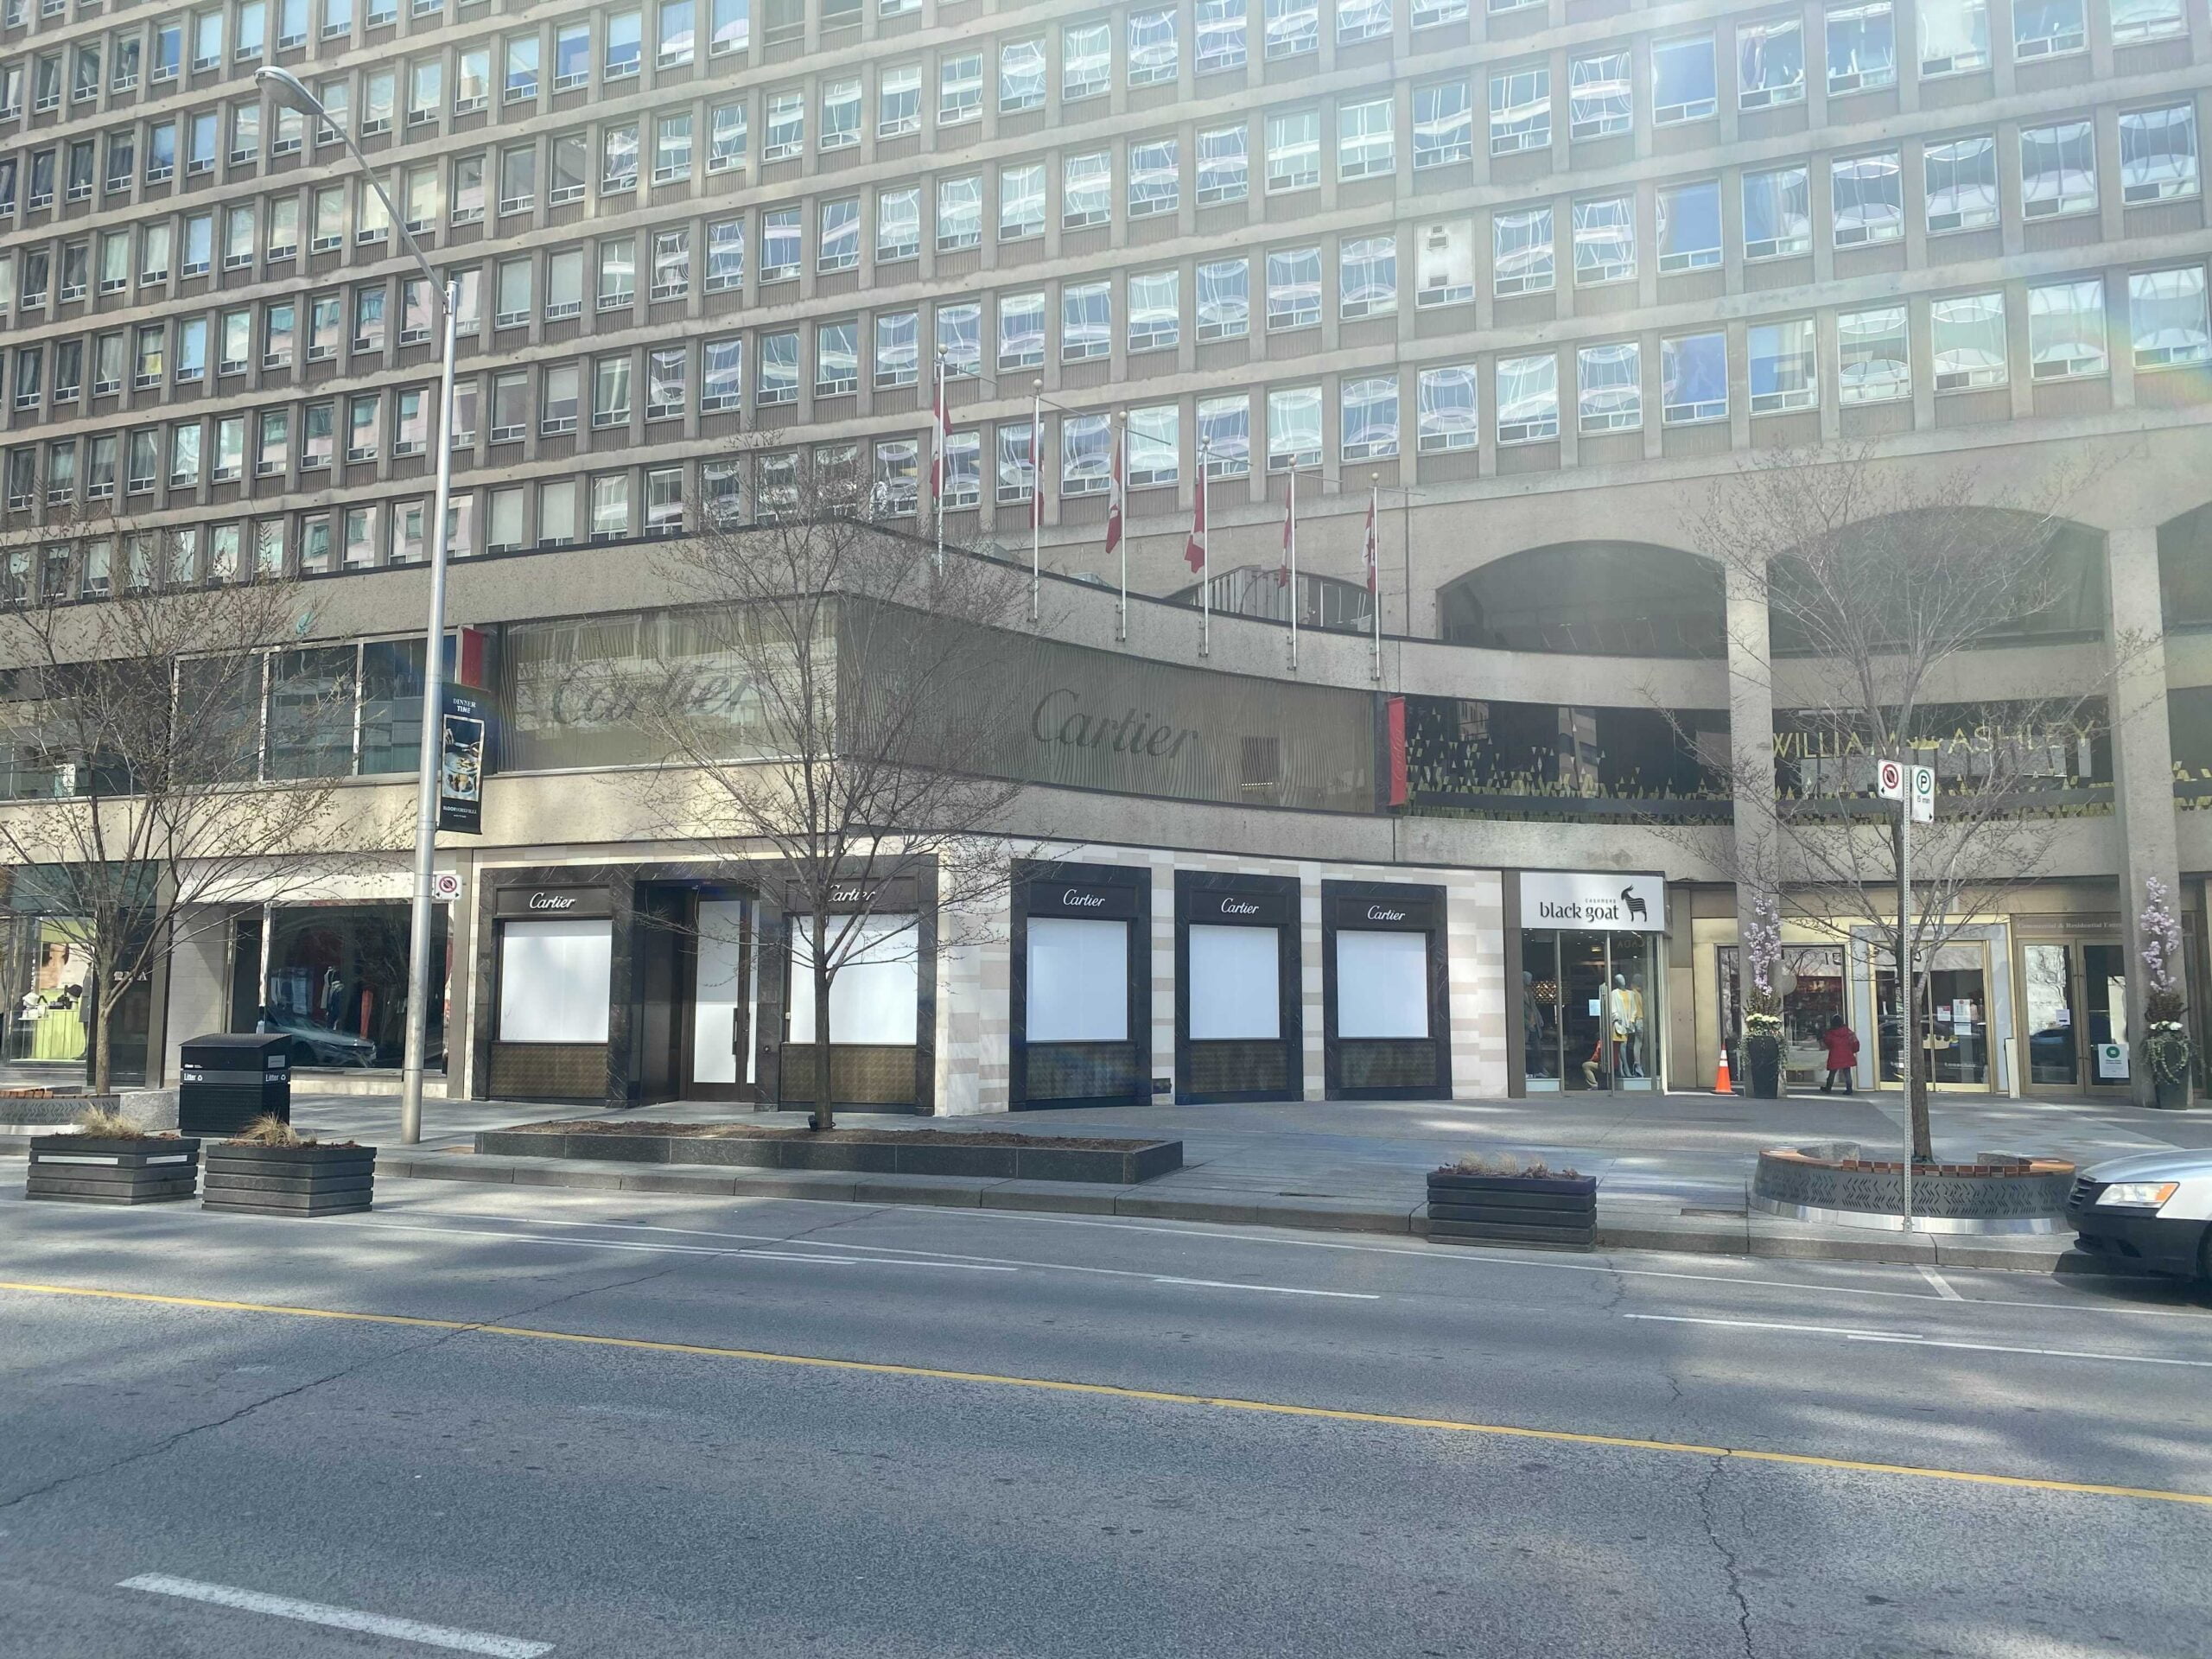 Nordstrom aims high with downtown flagship remodel